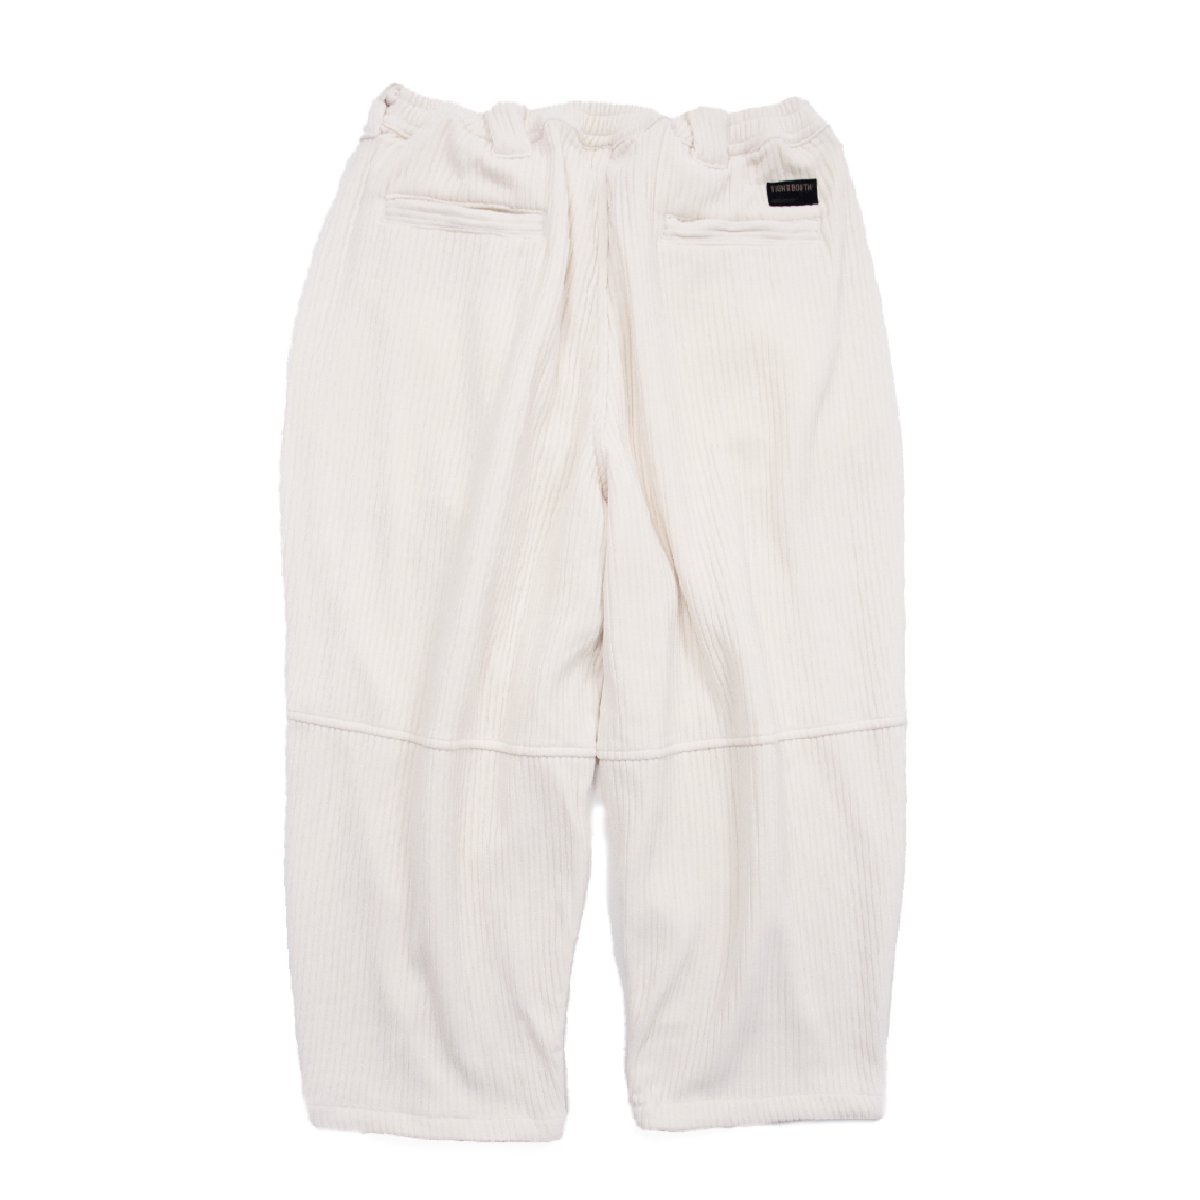 TIGHTBOOTH】Knit Cord Balloon Pants (White) - LIEON SHARE